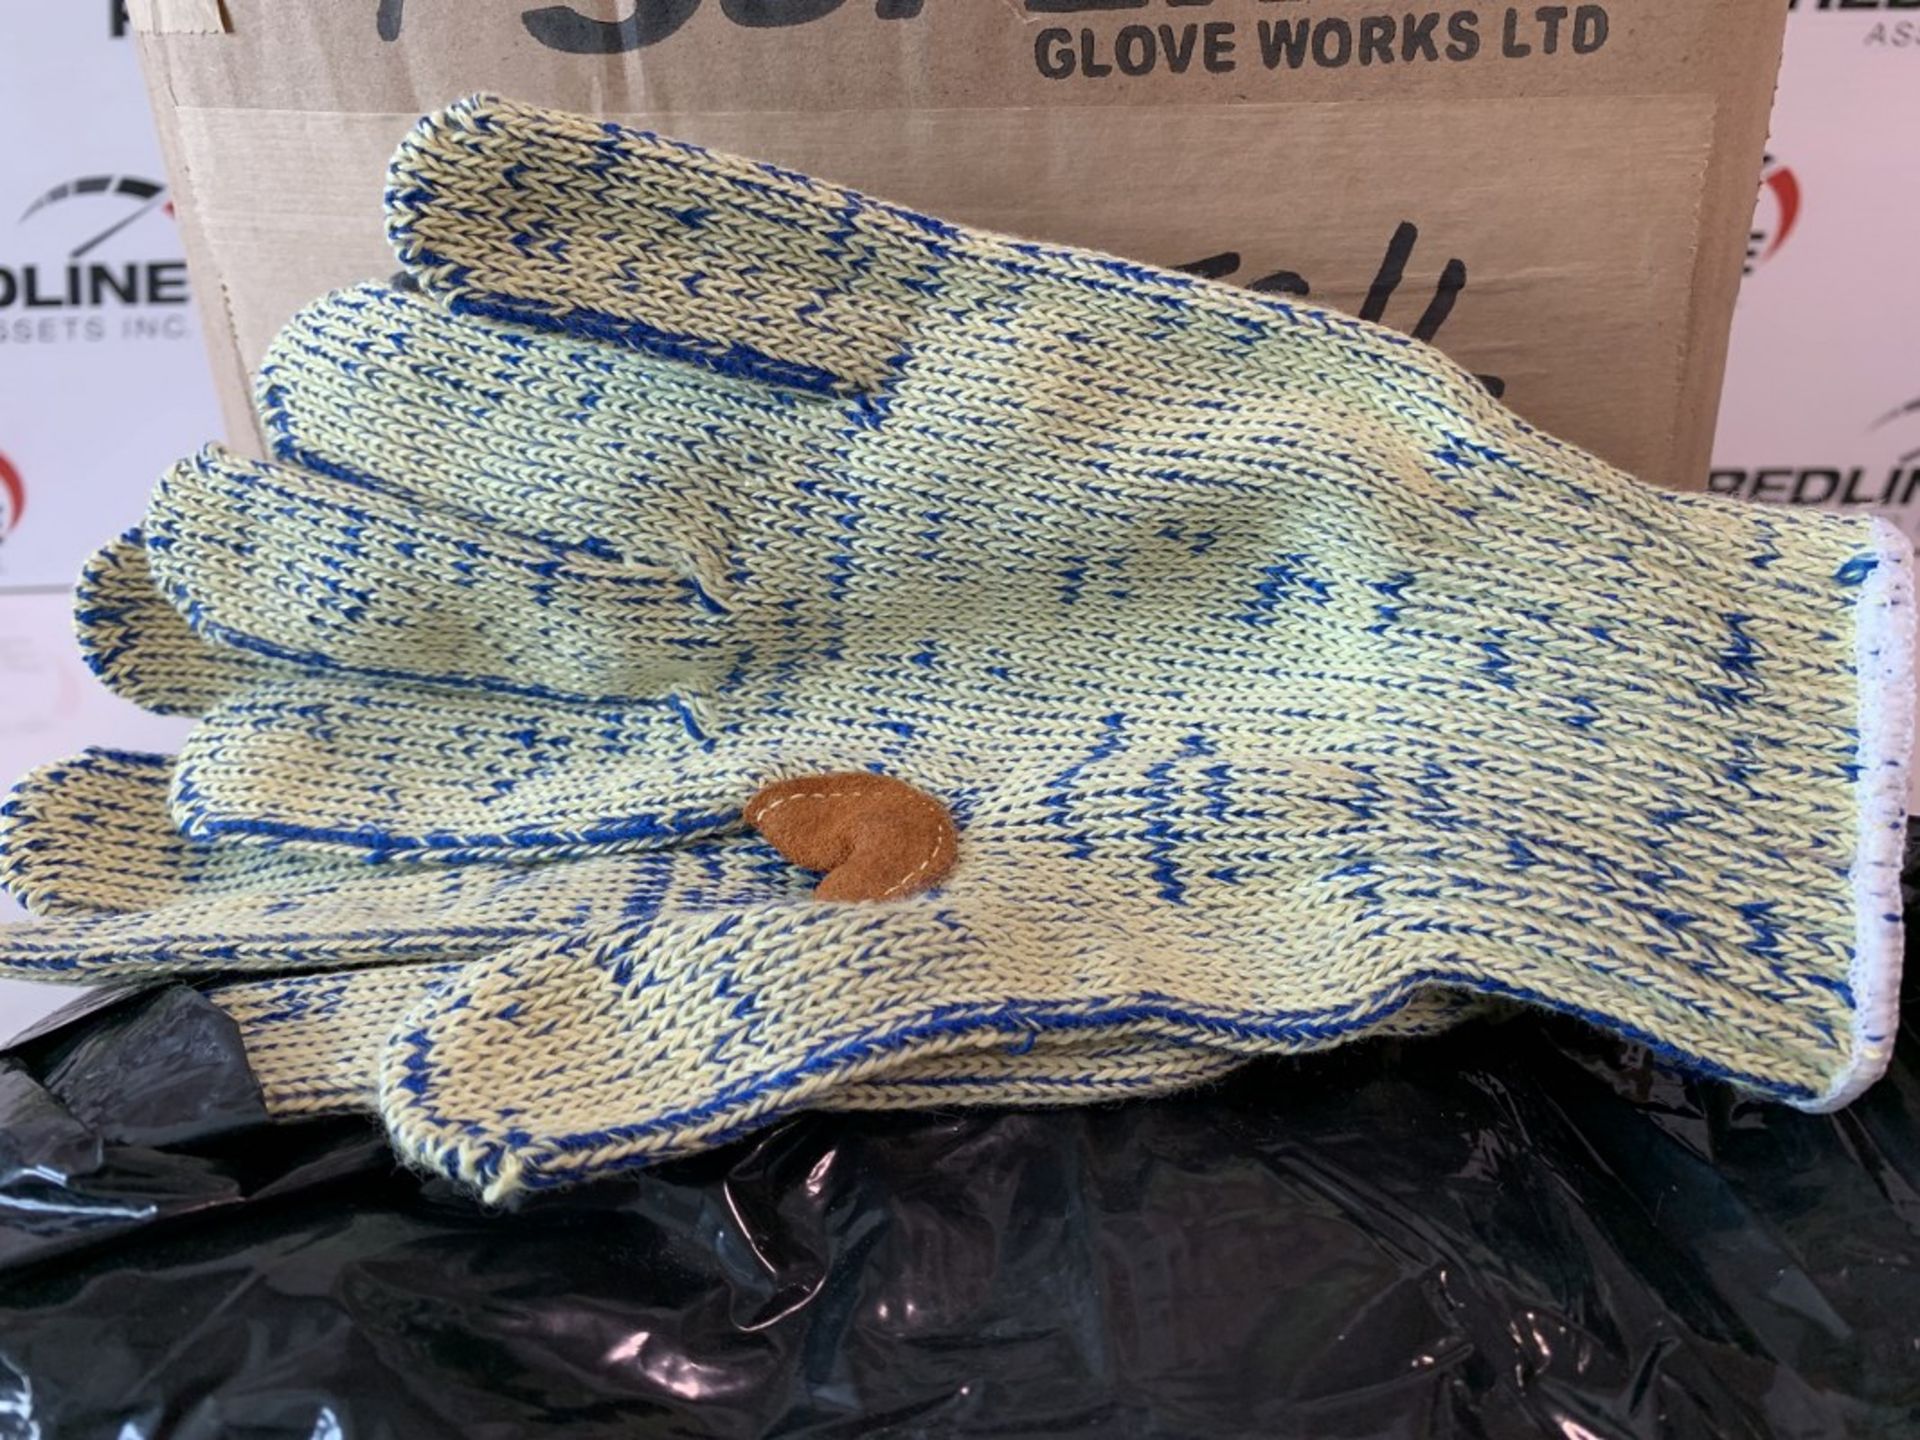 Superior Glove Works - Work Gloves For Every Industry - 144 Pairs